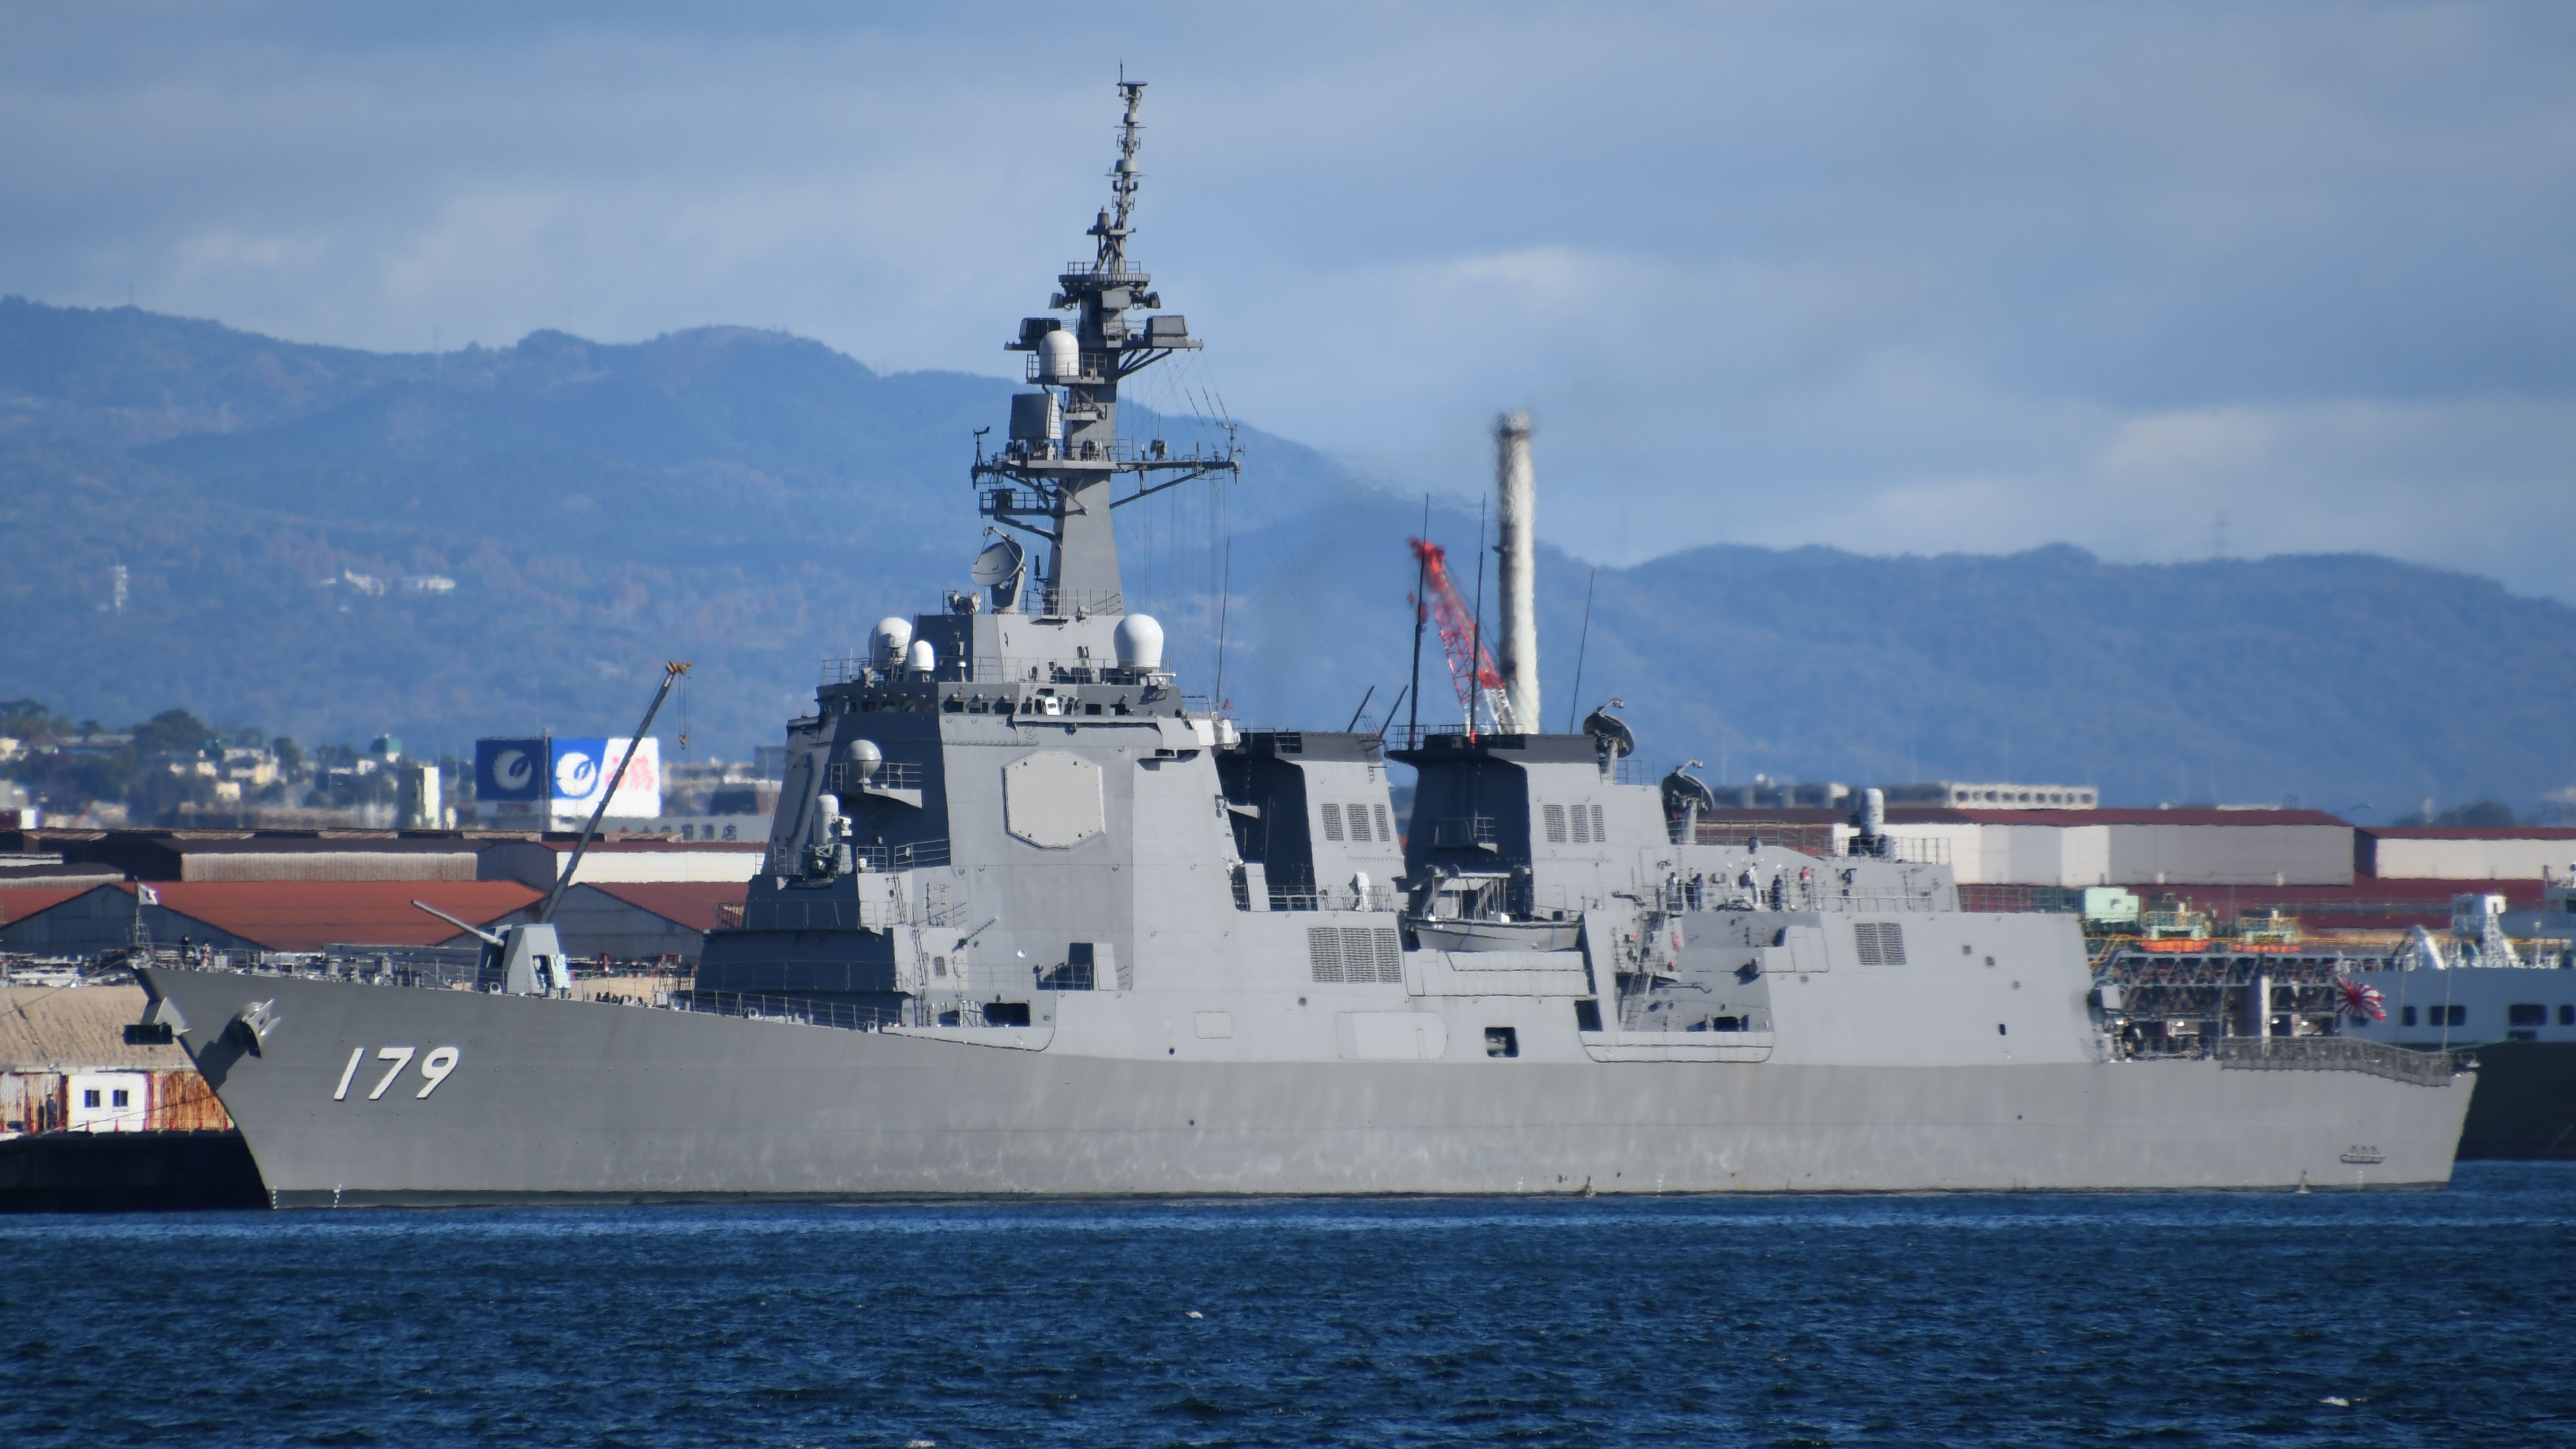 Japan's Mega-Size Missile-Defense Destroyers Could Be Some Of The